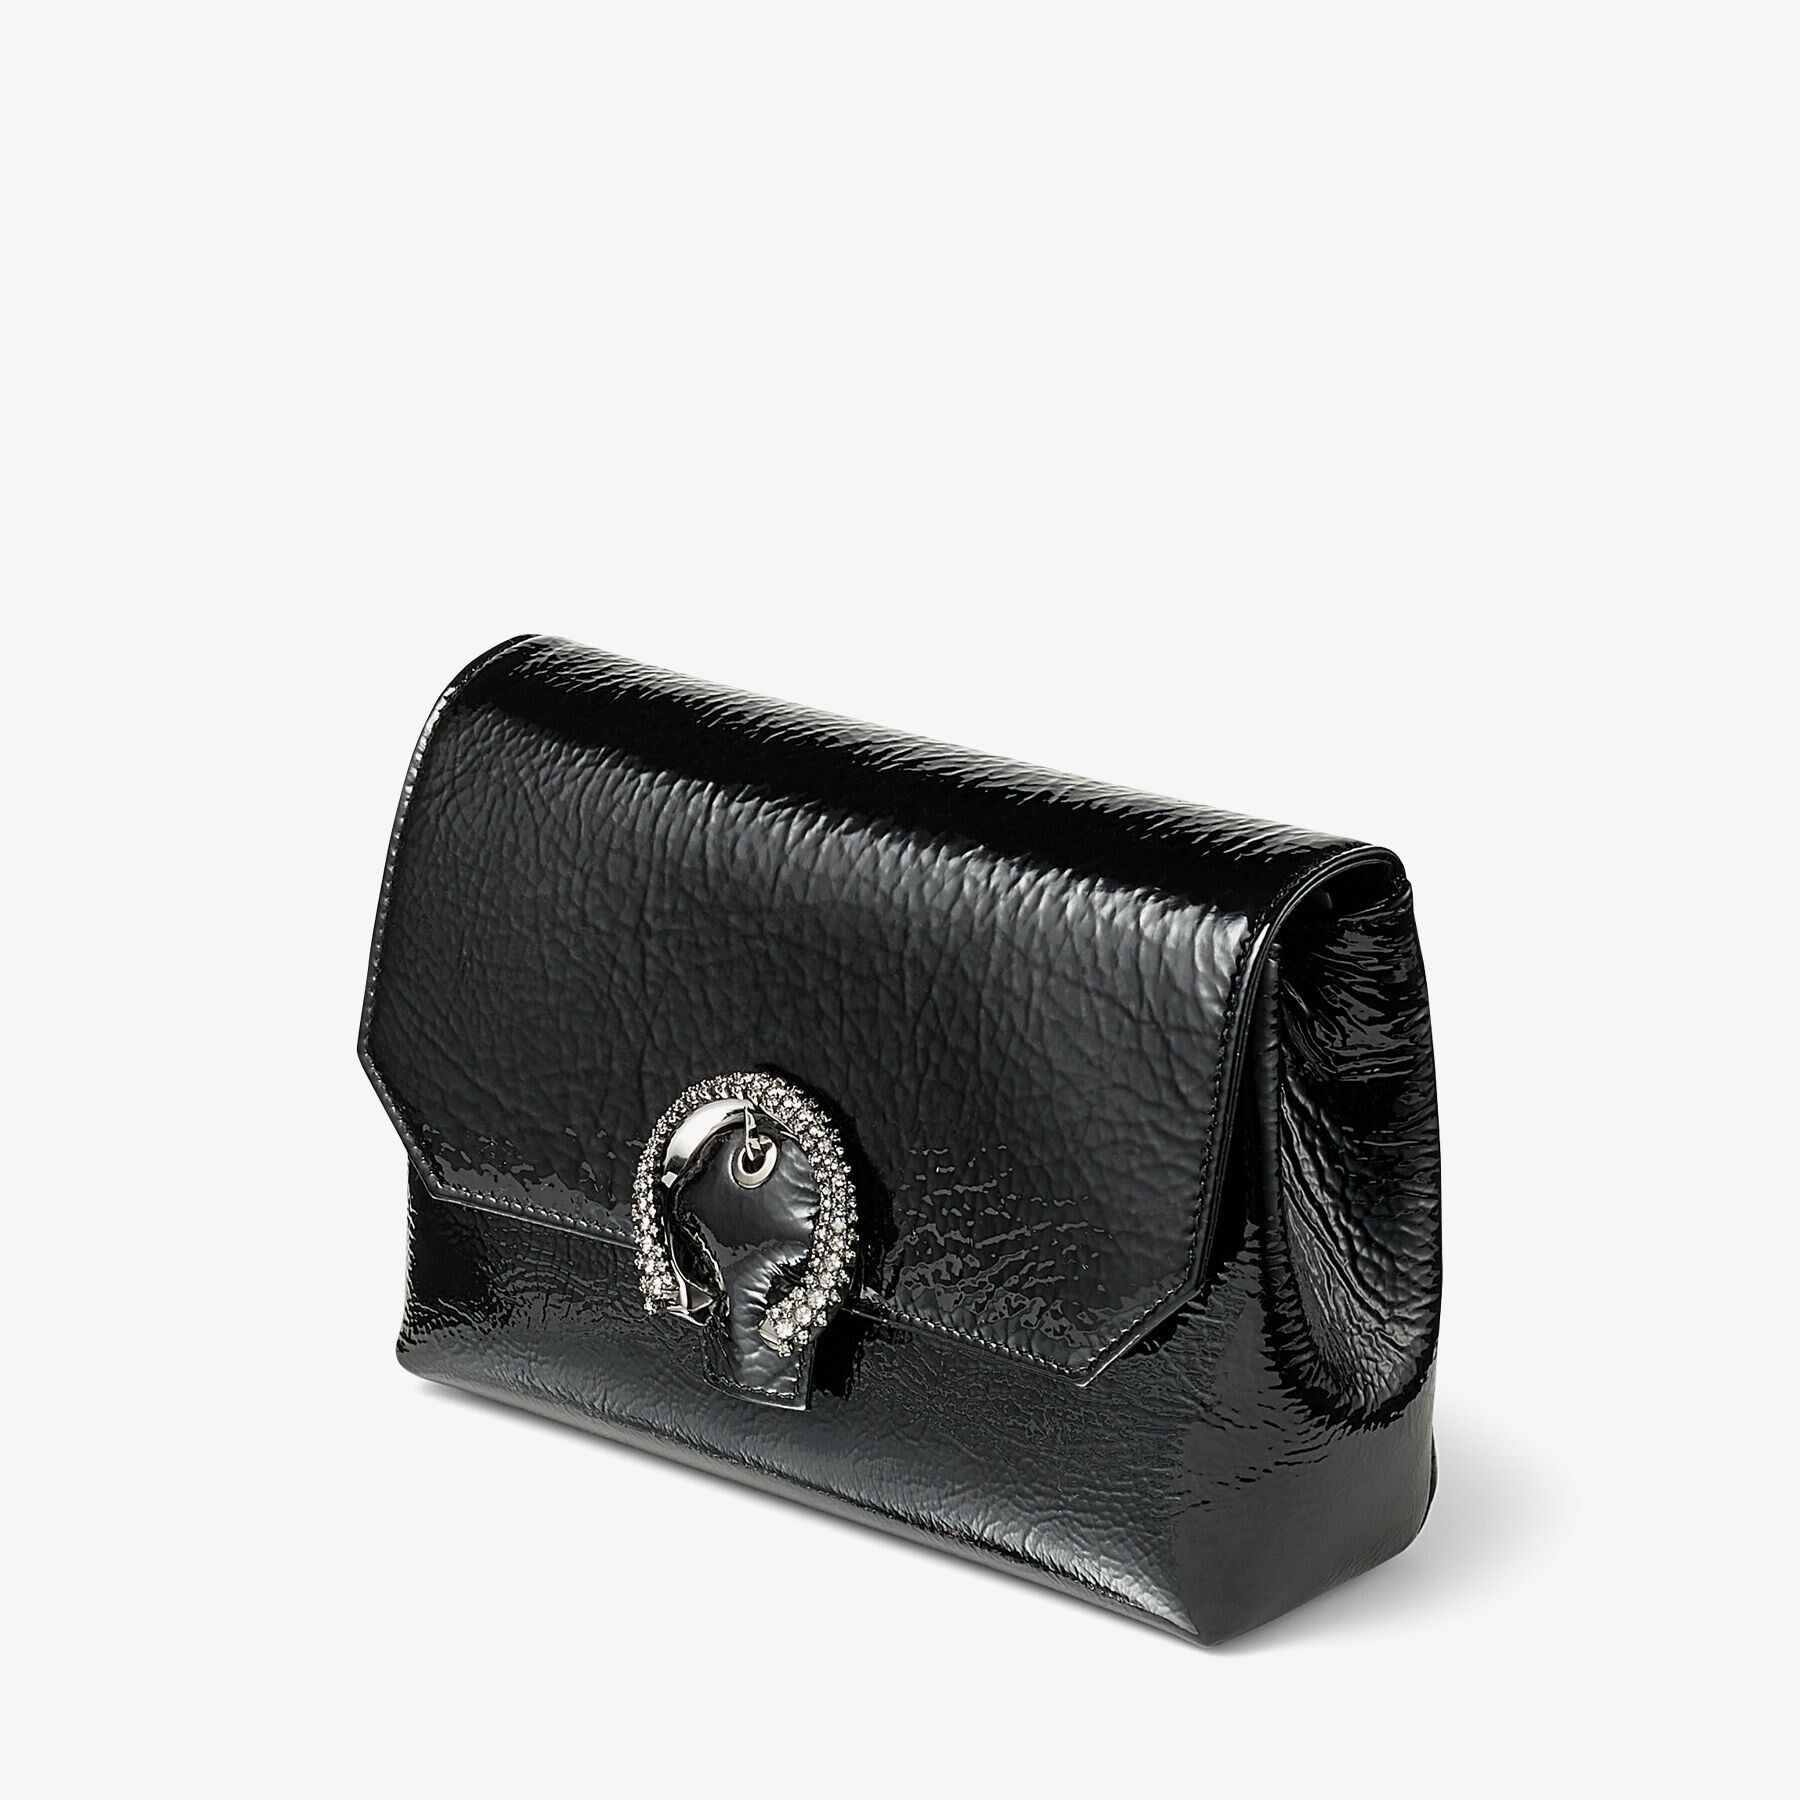 Black Patent Textured Leather Mini Bag with Crystal Buckle | SOFT 